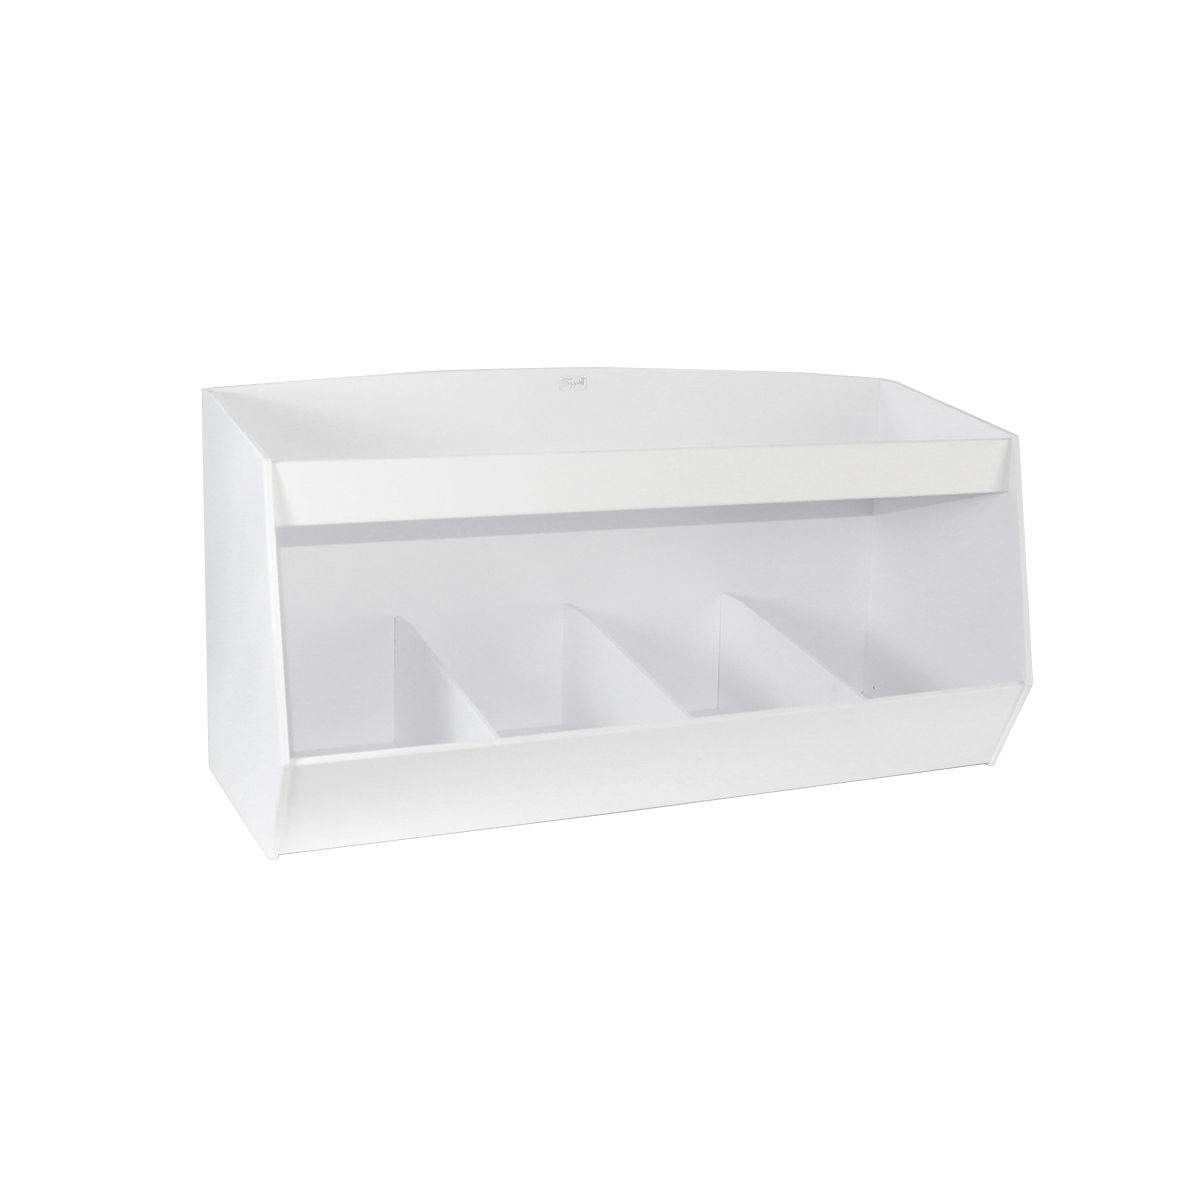 TrippNT 50339 White PVC Plastic Lab Storage Bin with 8 Fixed Compartments 24 Width x 12.5 Height x 10 Depth 